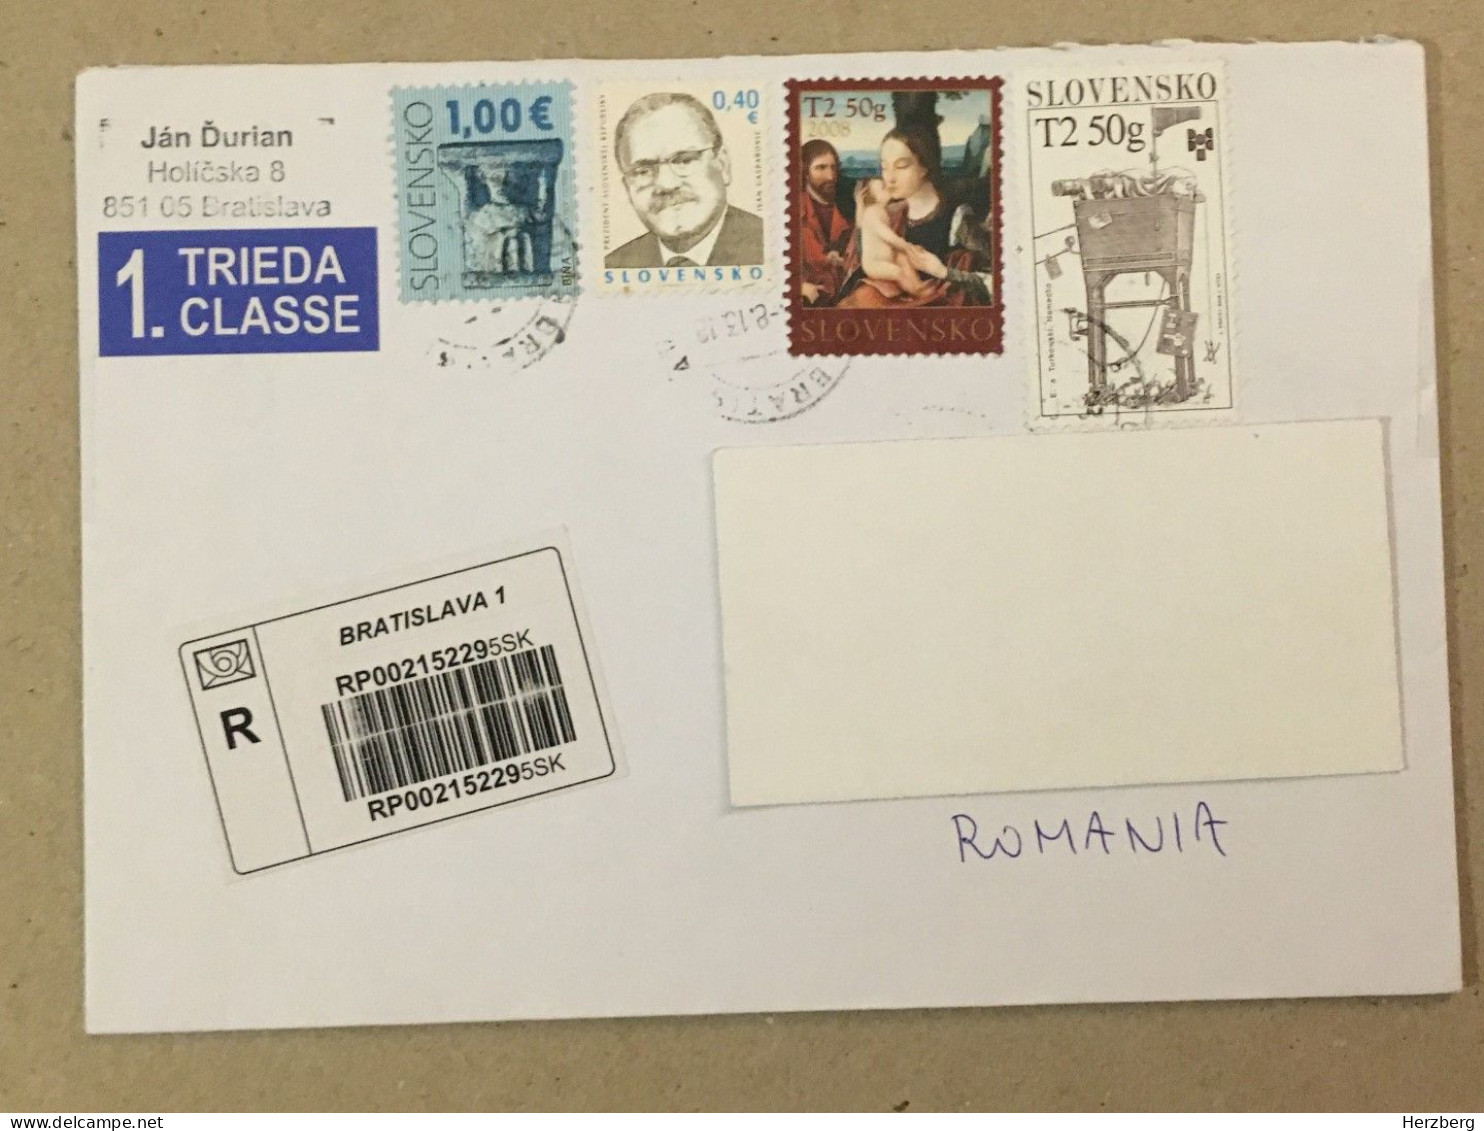 Slovakia Used Letter Stamp Circulated Cover Registered Barcode Label Printed Sticker Madonna Ivan Gasparovic 2013 - Covers & Documents